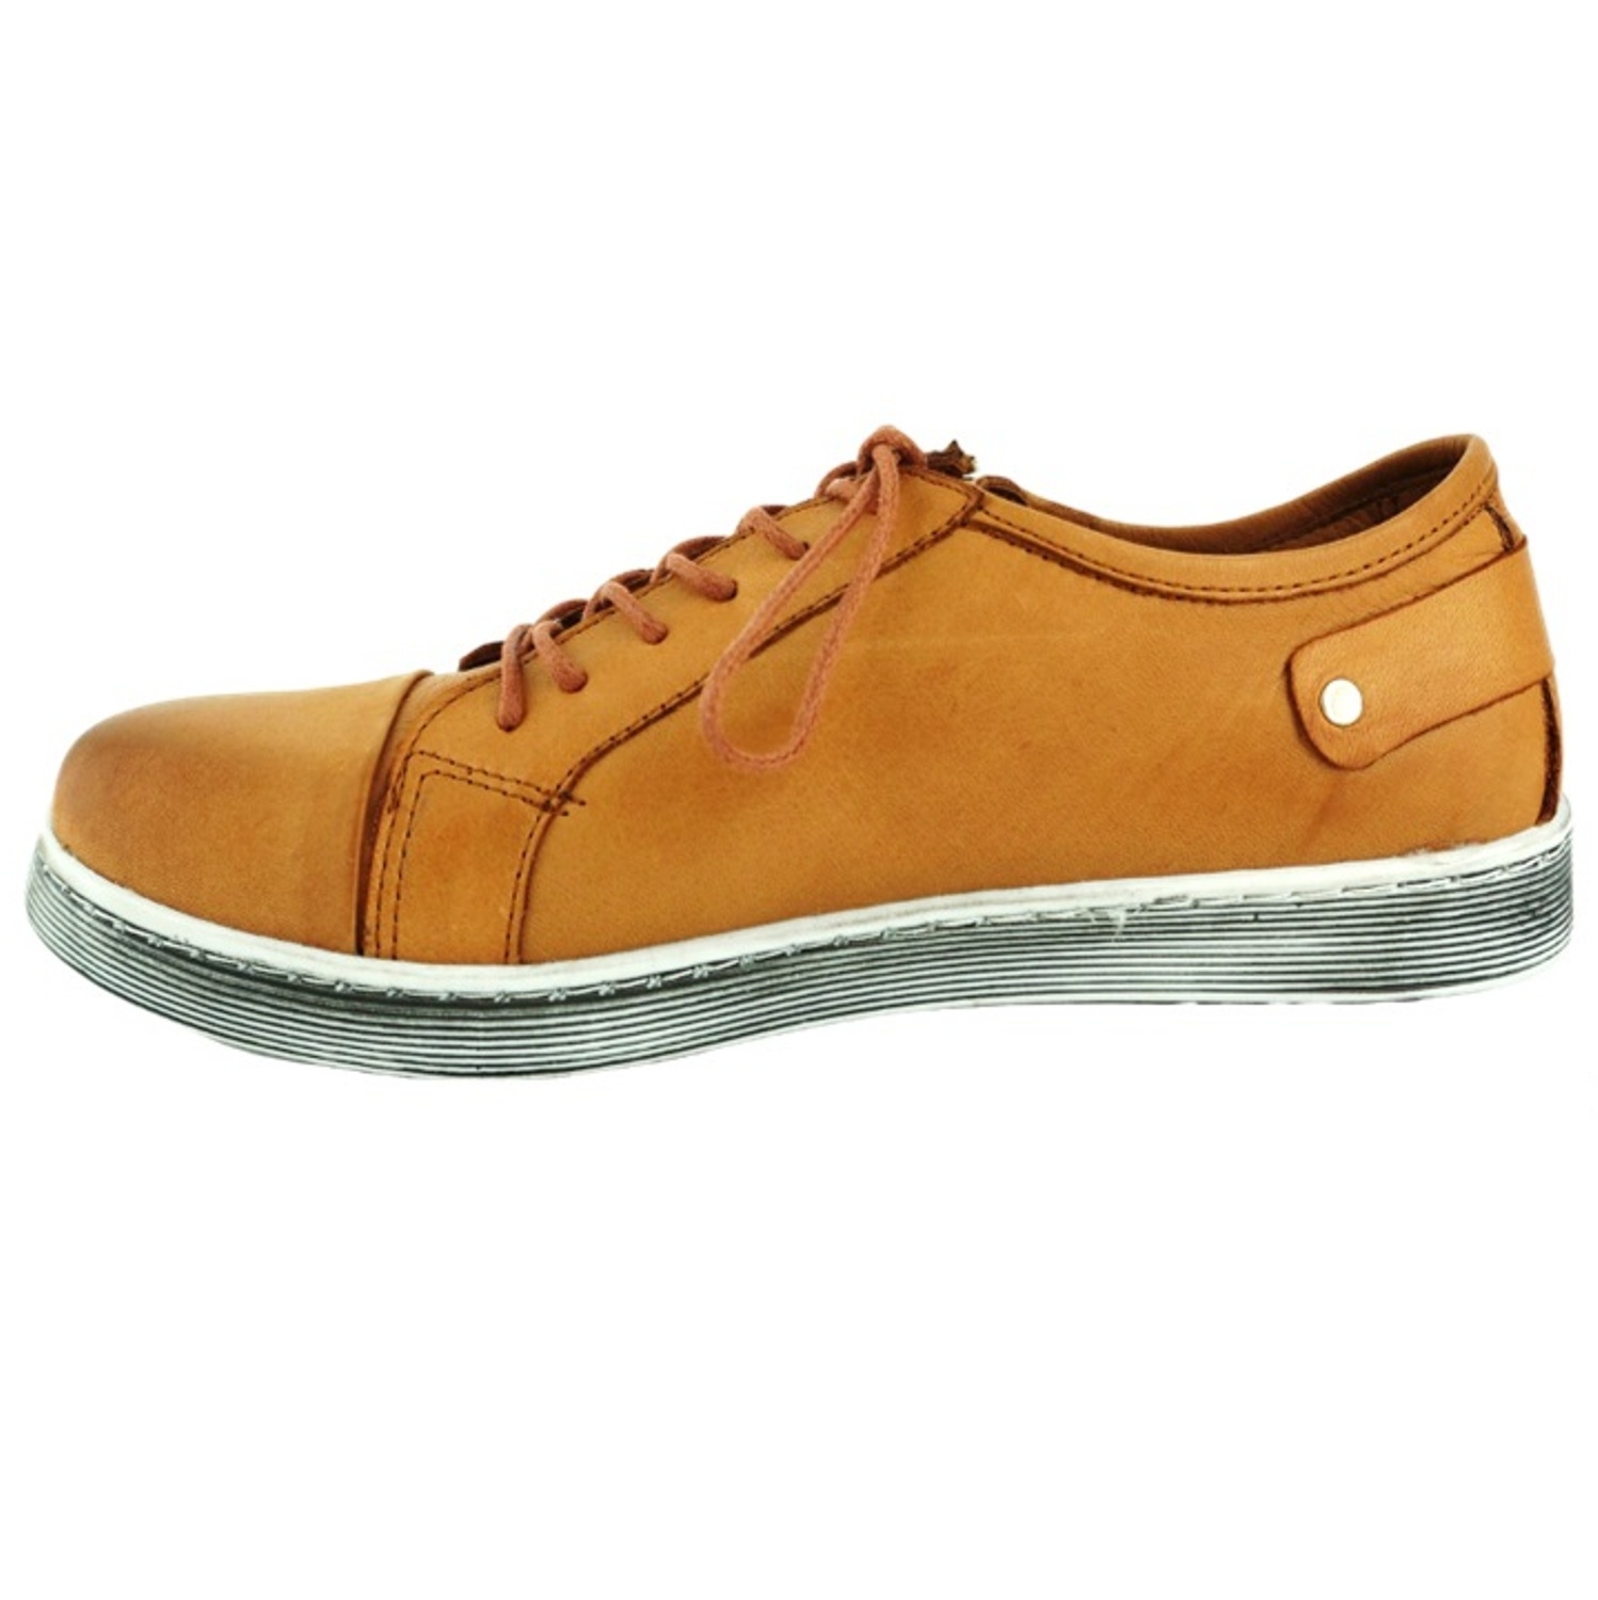 Cabello EG18 Womens Casual Shoes: Tan | Mike Pawley Sports